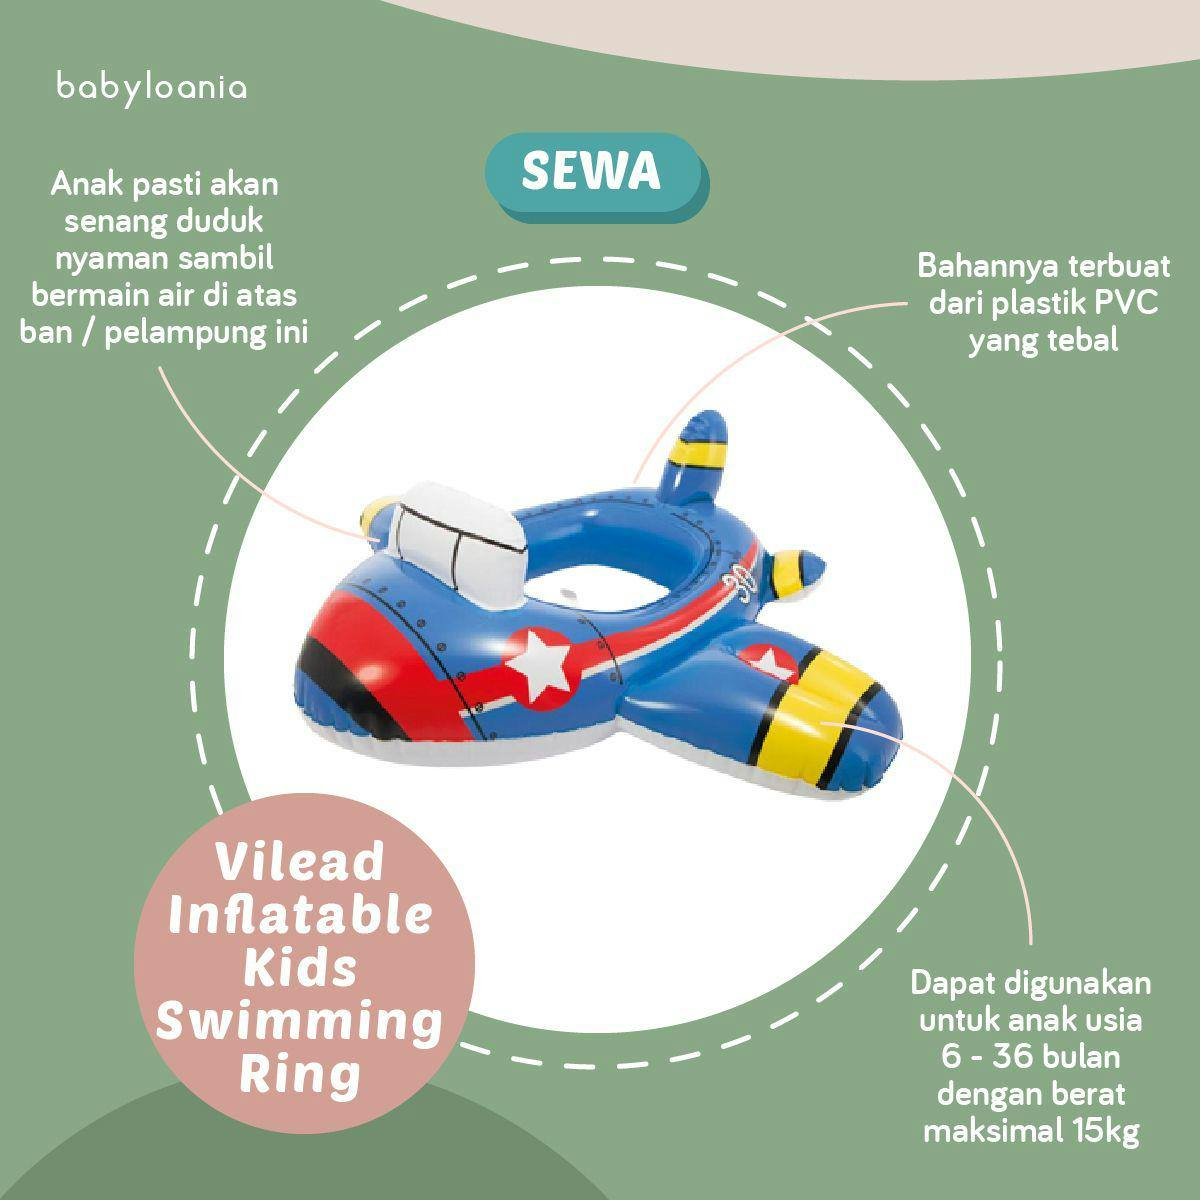 Image 39285 Vilead Inflatable Kids Swimming Ring